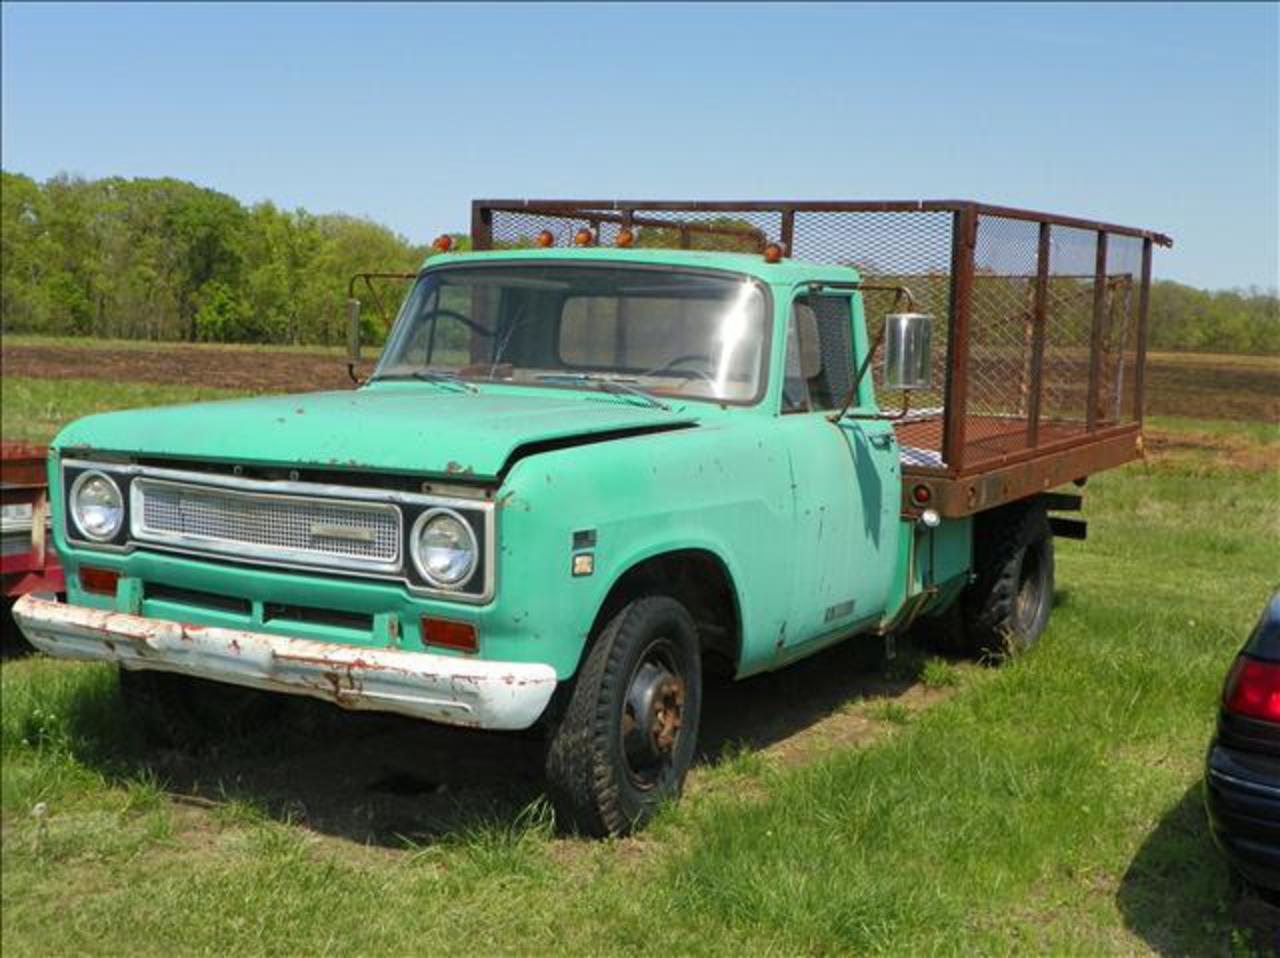 1971 International 1310, Used Cars For Sale - Carsforsale.